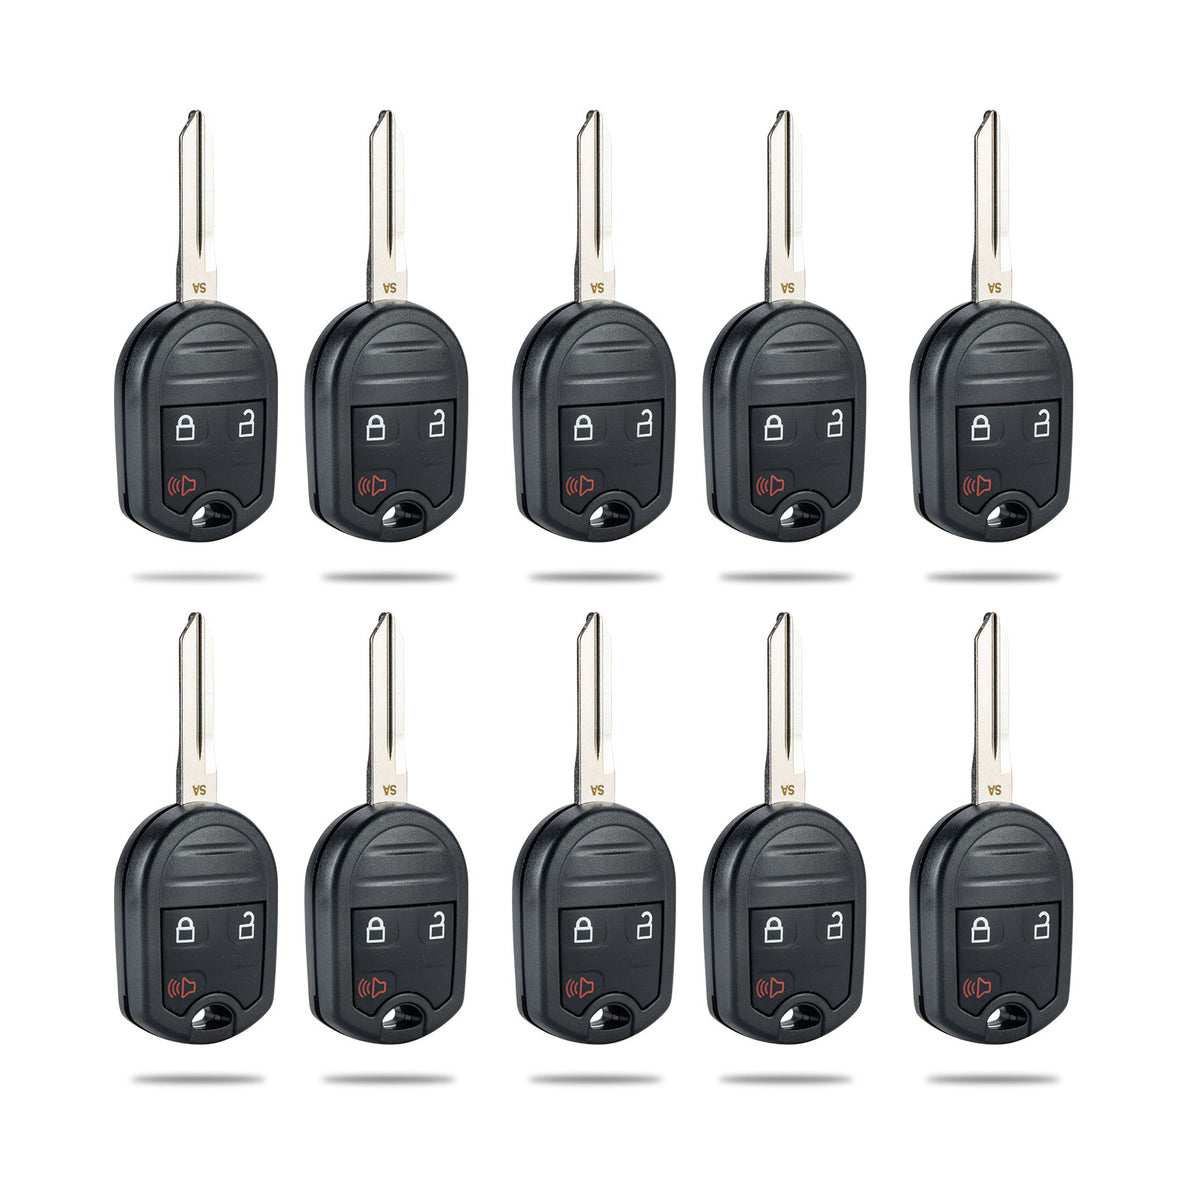 Lots of 10 Extra-Partss Remote Car Key Fob Replacement for Ford CWTWB1U793 164-R8070 fits 2011 2012 2013 2014 F-150 F-250 F-350